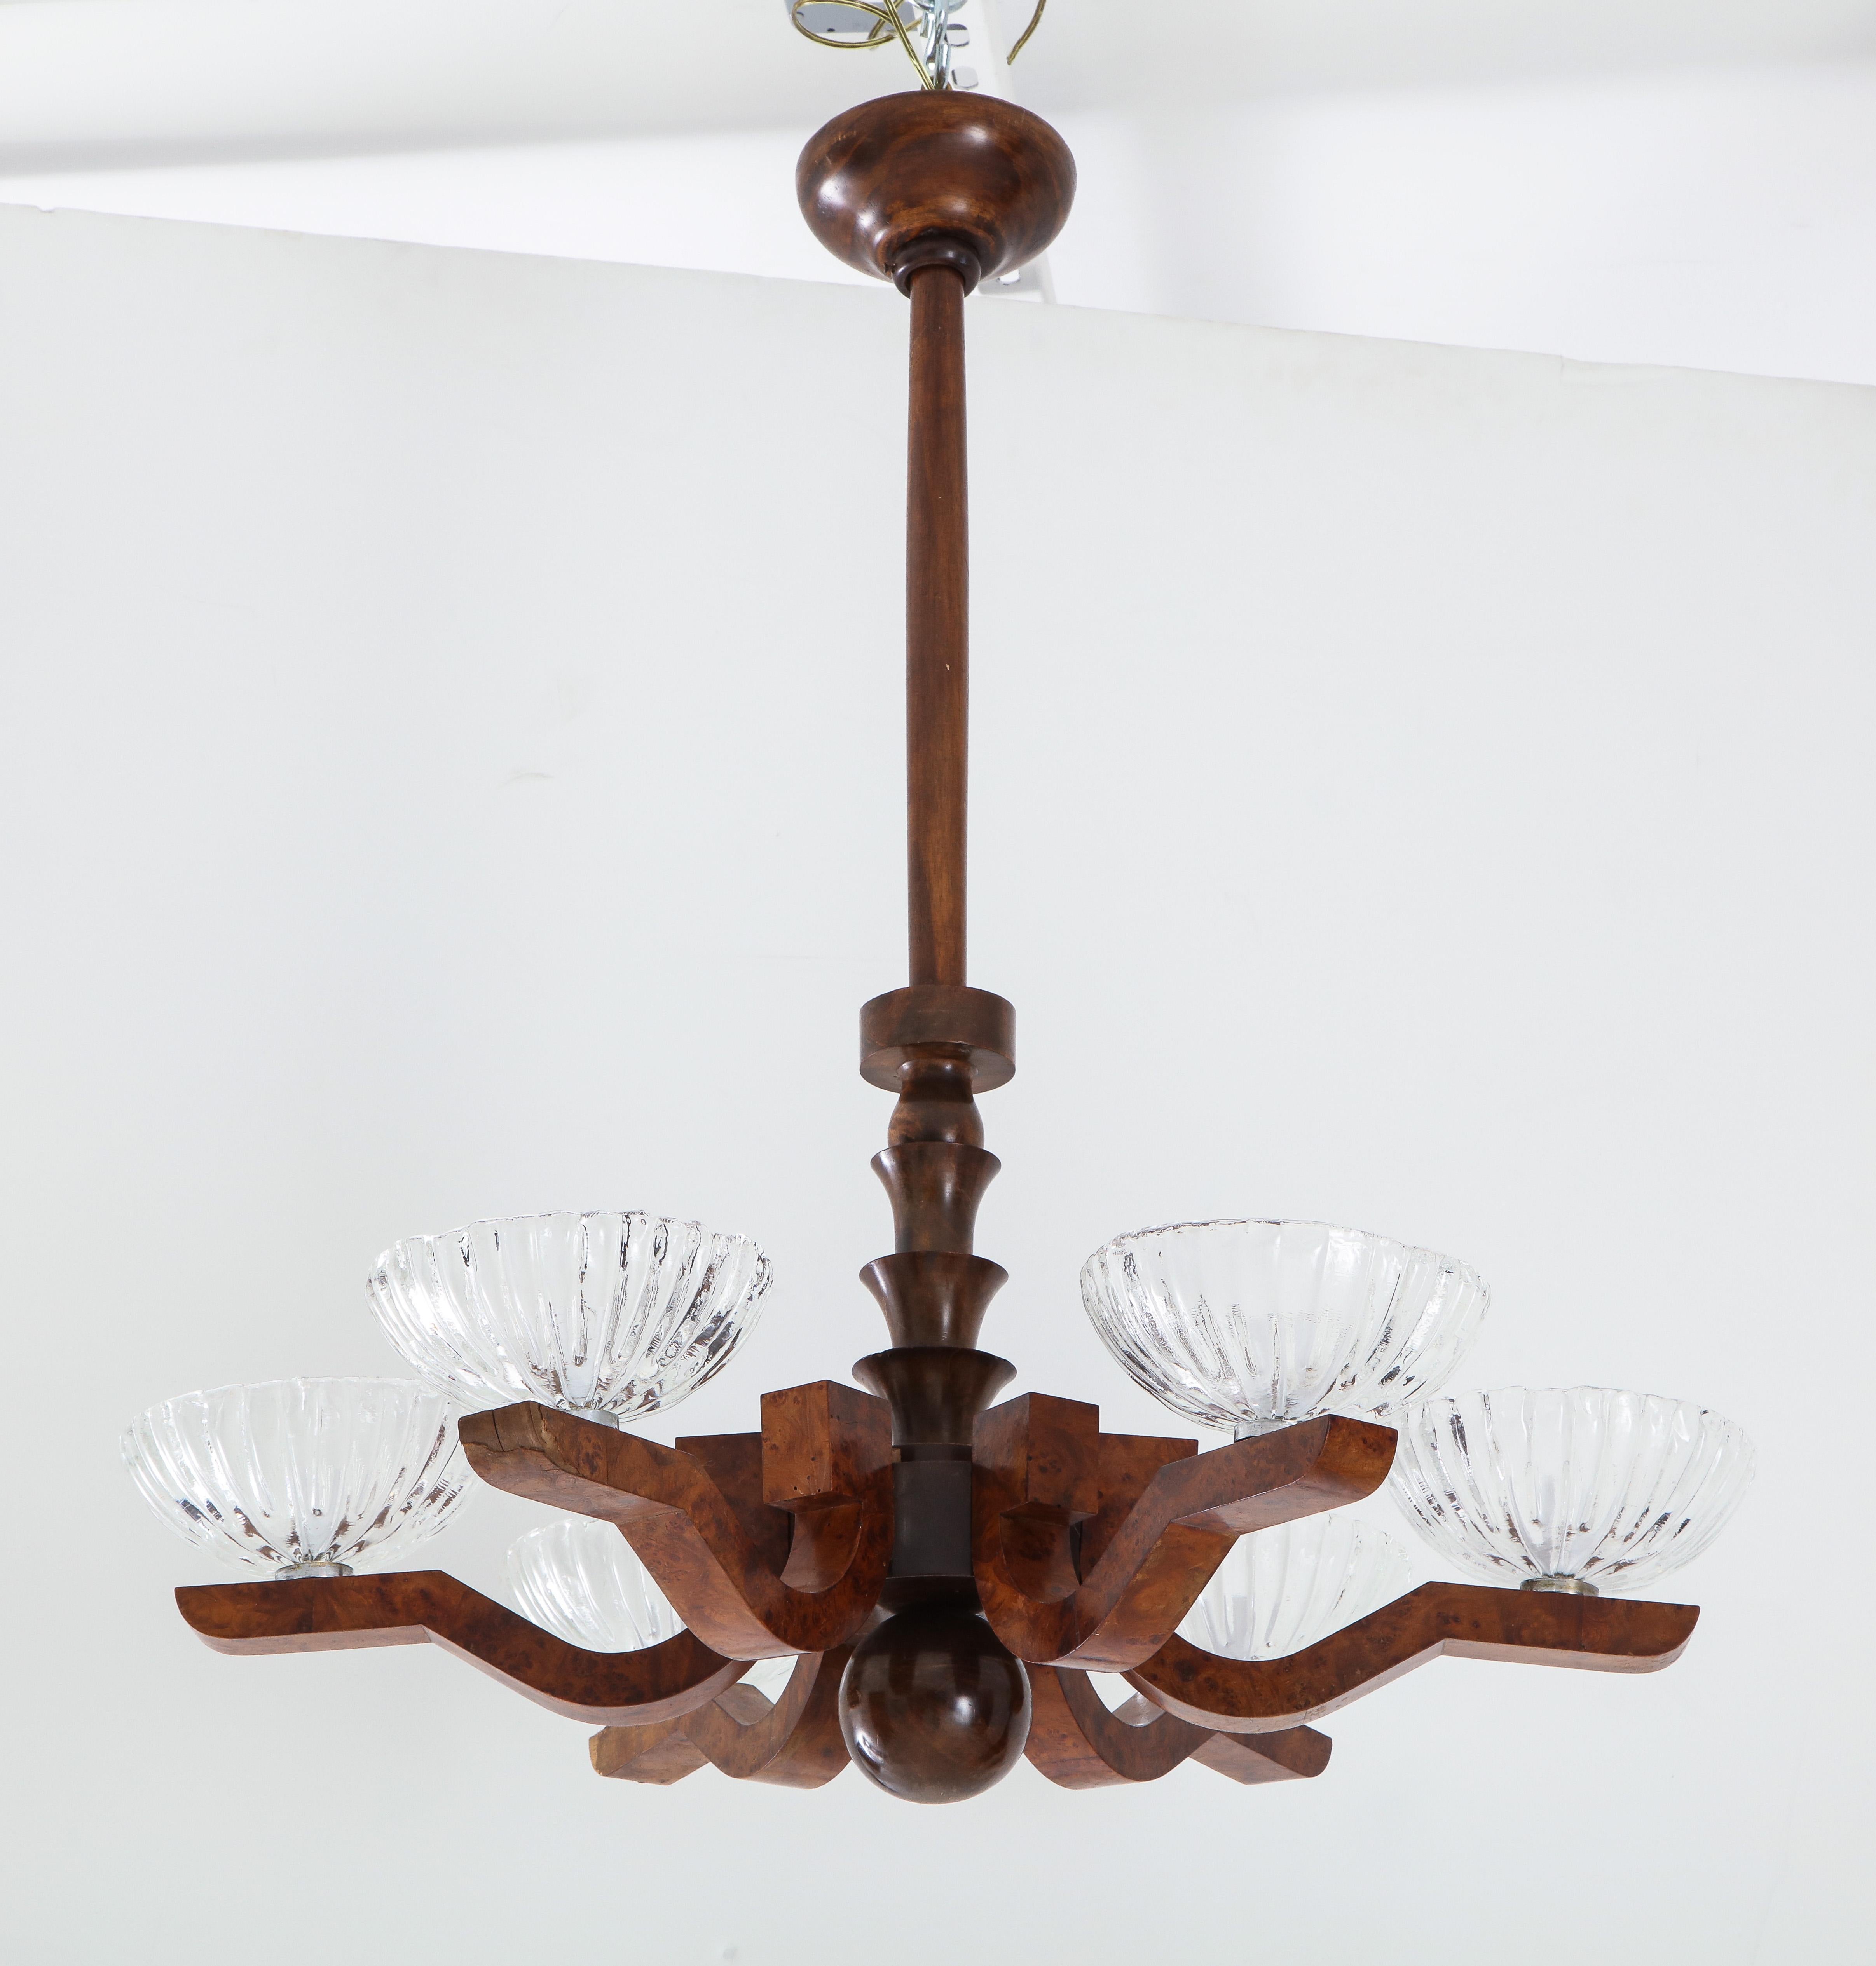 An Italian Art Deco burl wood chandelier; the central stem, canopy, ball finial and six arms in a beautifully carved burl wood veneer with scalloped edged blown glass bobeche. The contrast of the warm wood and glass makes a stunning presentation.